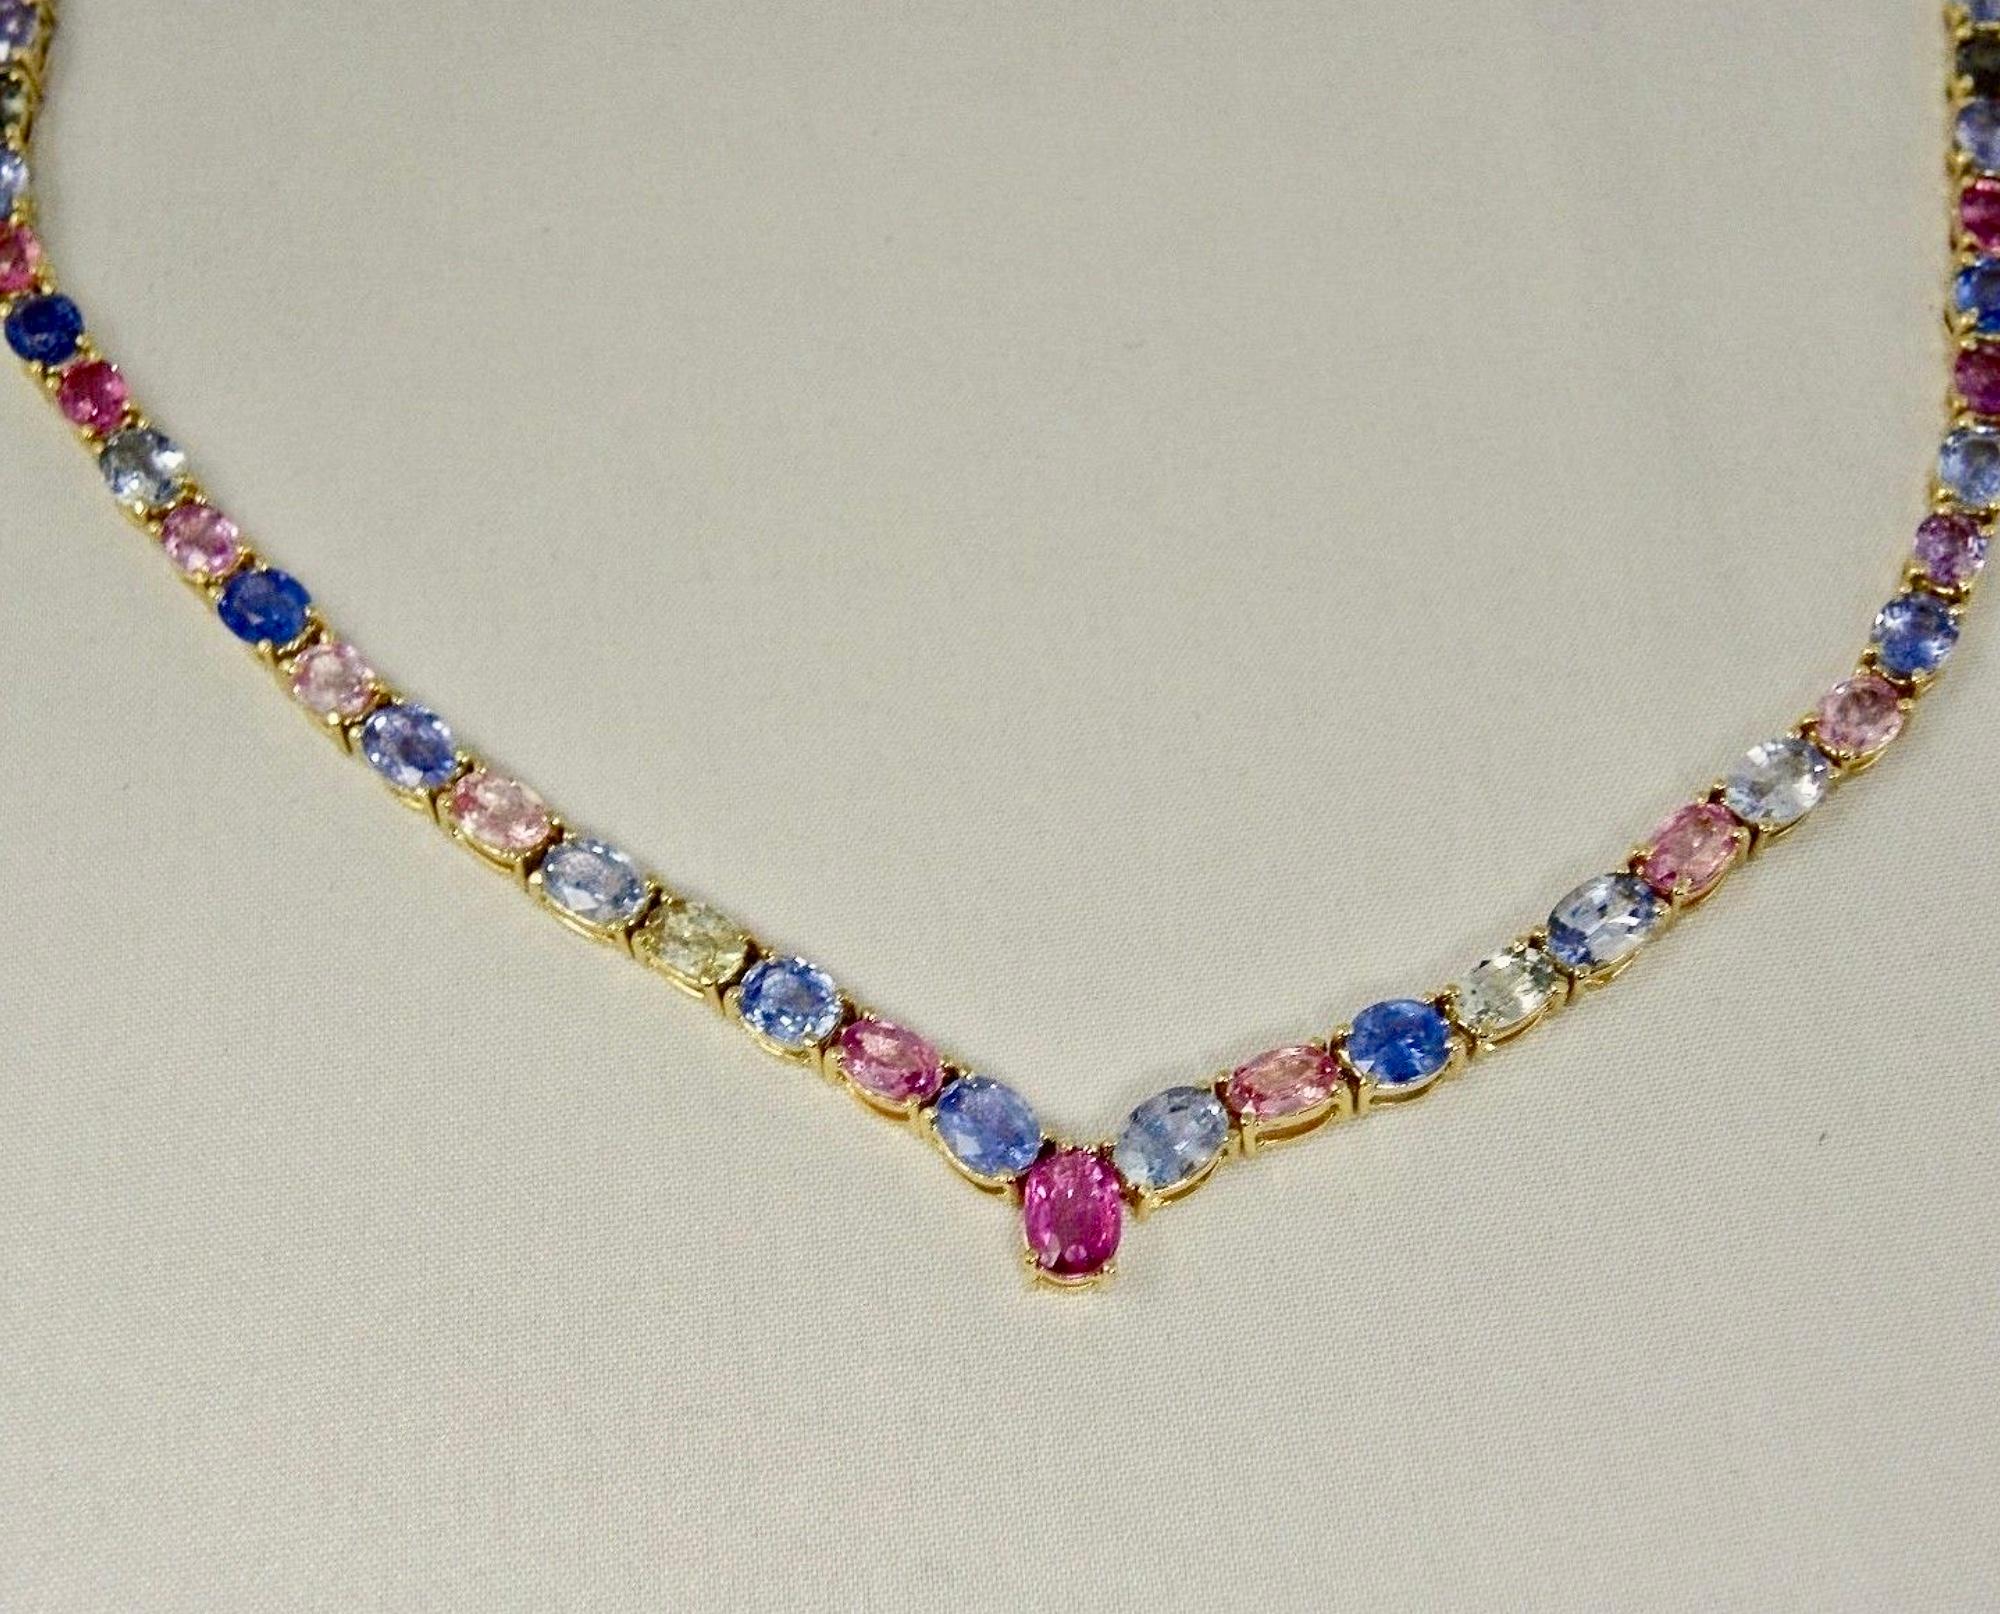  50.00 Carat Burma Unheated Multicolor Sapphires Necklace Yellow Gold 18K  For Sale 4